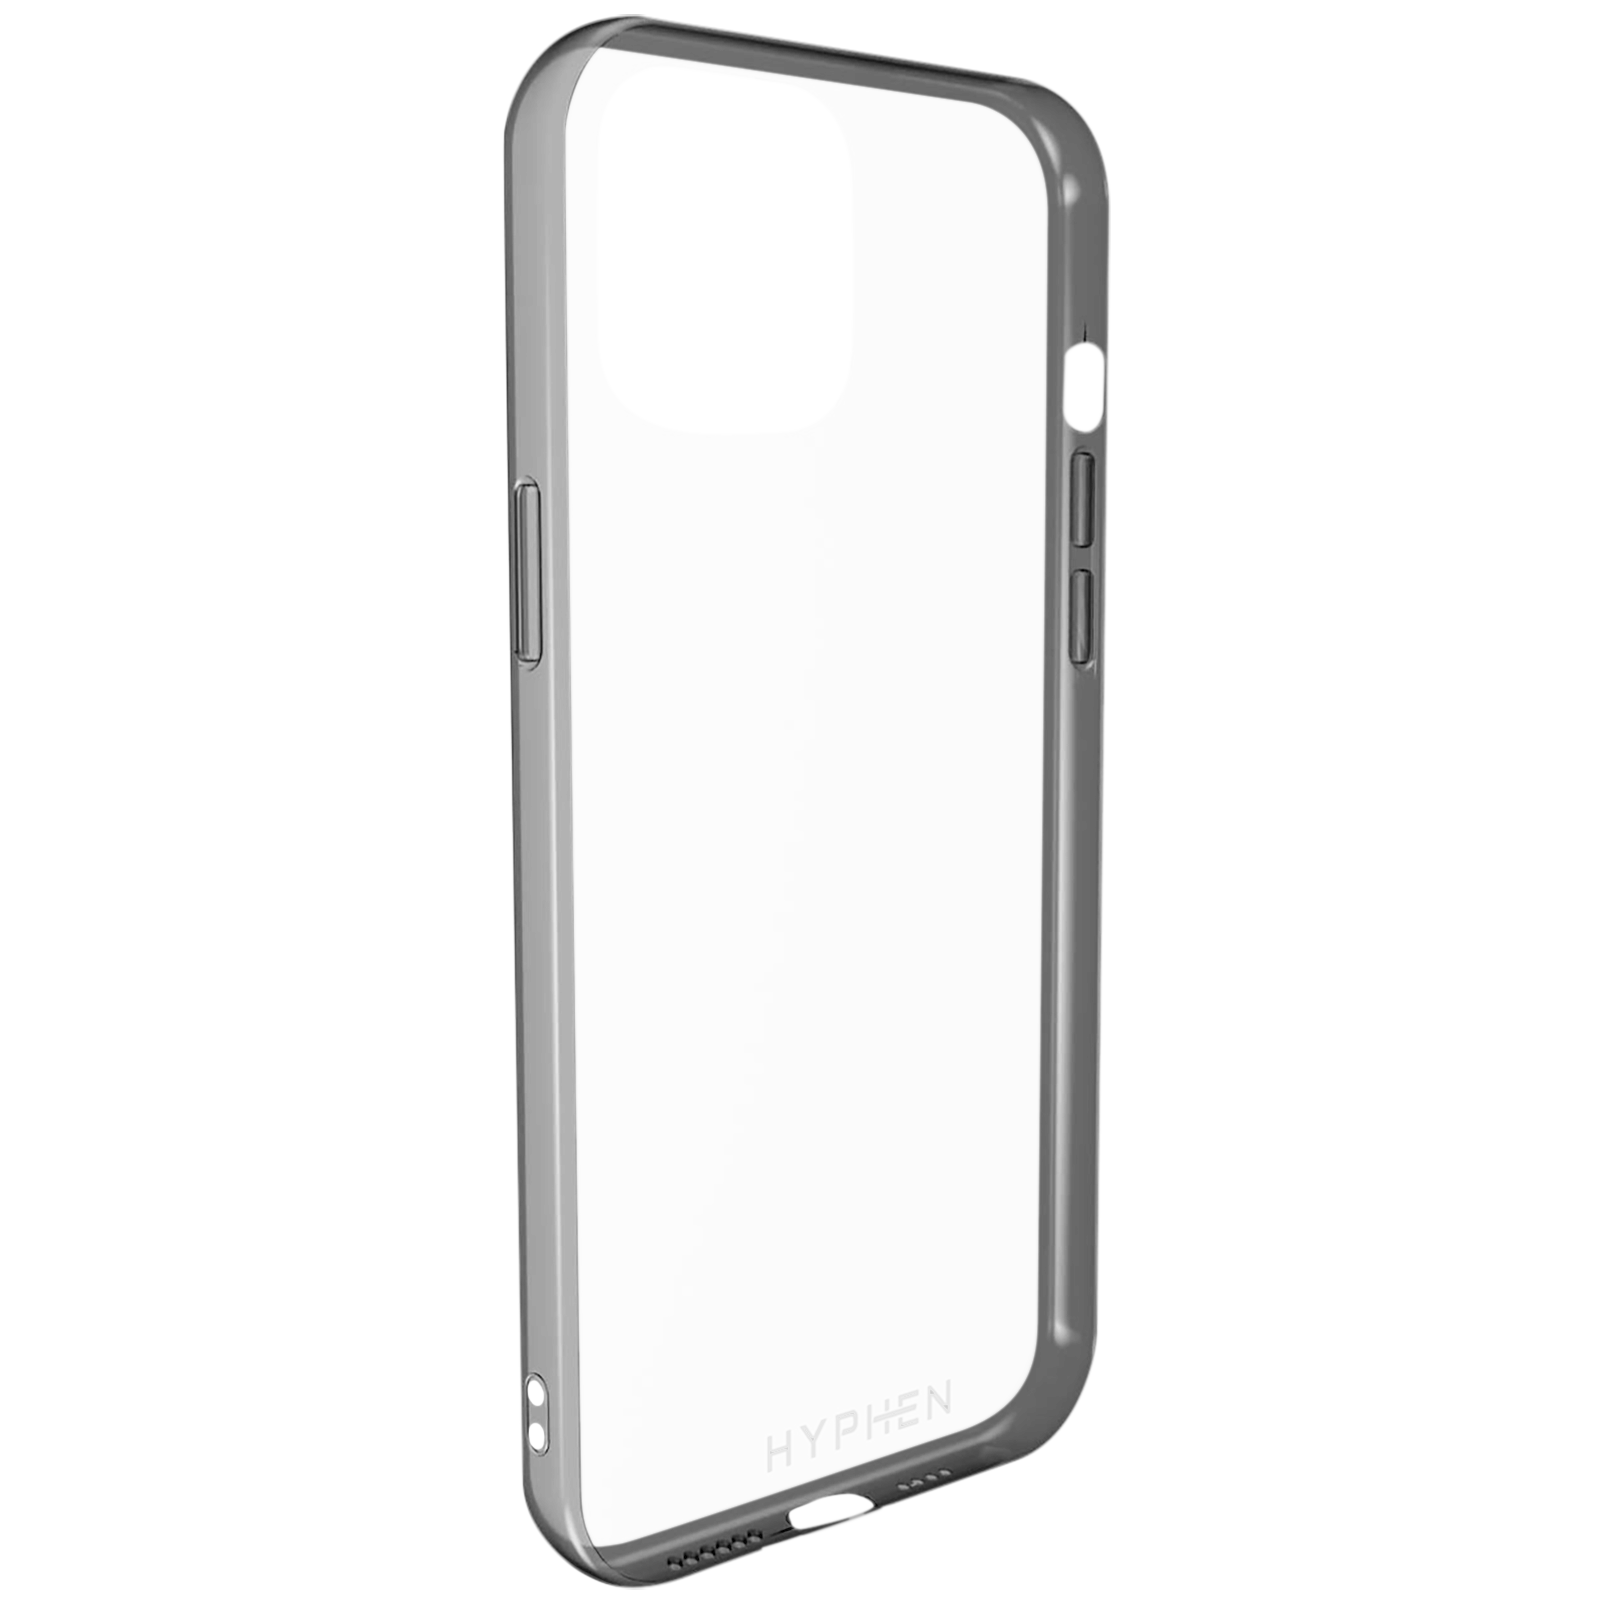 Buy Hyphen TPU and PC Back Case For iPhone 12 Mini (Compact, Flexible and  Slim, HPC-DXII540442, Clear) Online - Croma